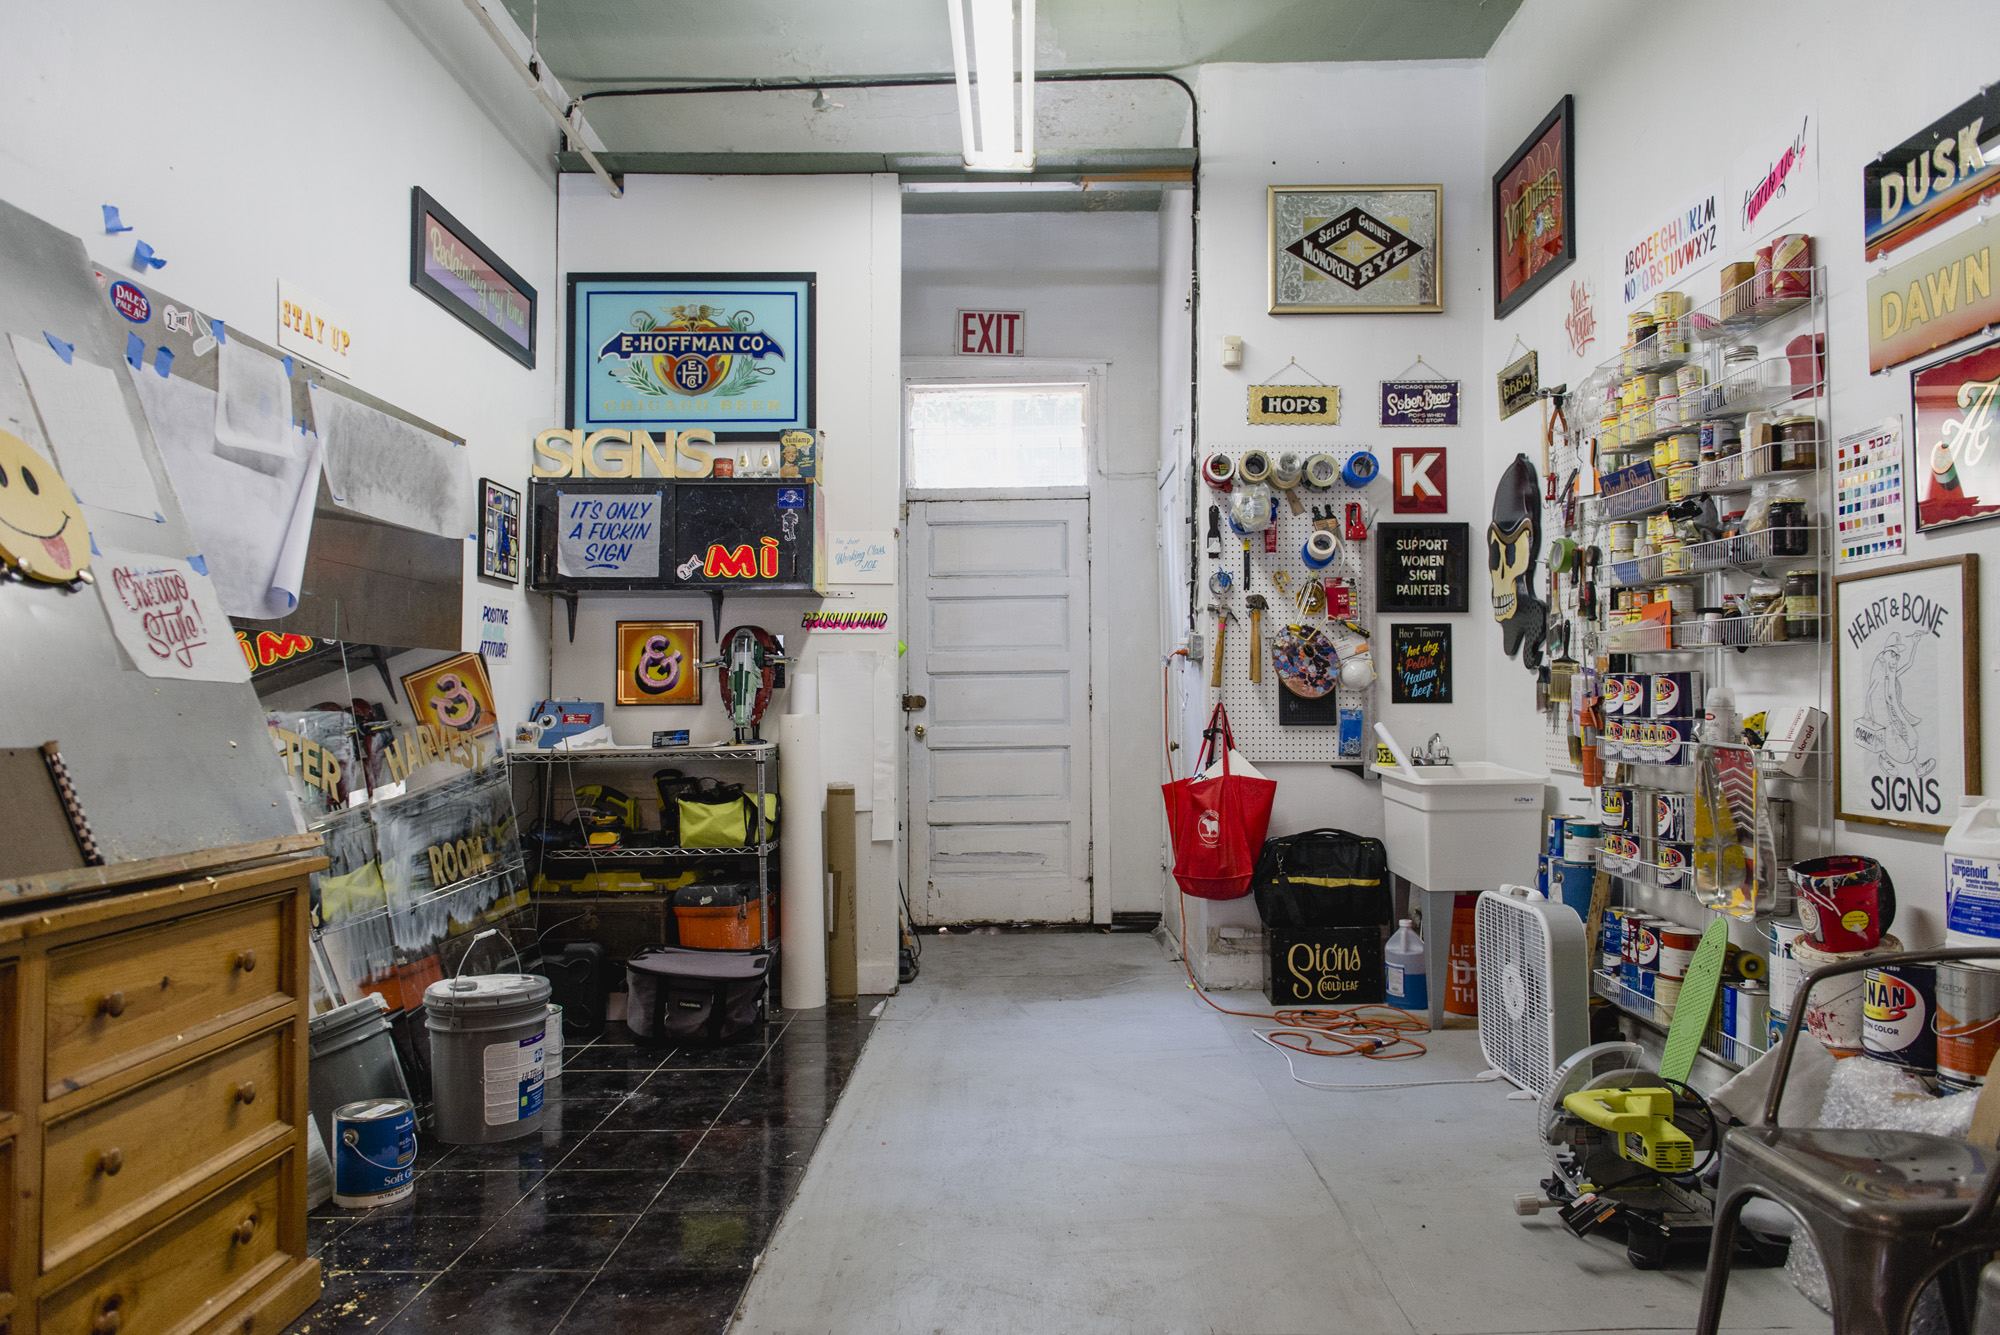 Image: The back end of Kelsey and Andrew's gallery space, filled with various tools and art supplies. This space functions as a studio space for their business Heart & Bone, Gold Gilded and Hand Painted Signs, which has been in existence since 2012. Kelsey and Andrew's work has local, national, and global reach. Photo by Ryan Edmund Thiel.